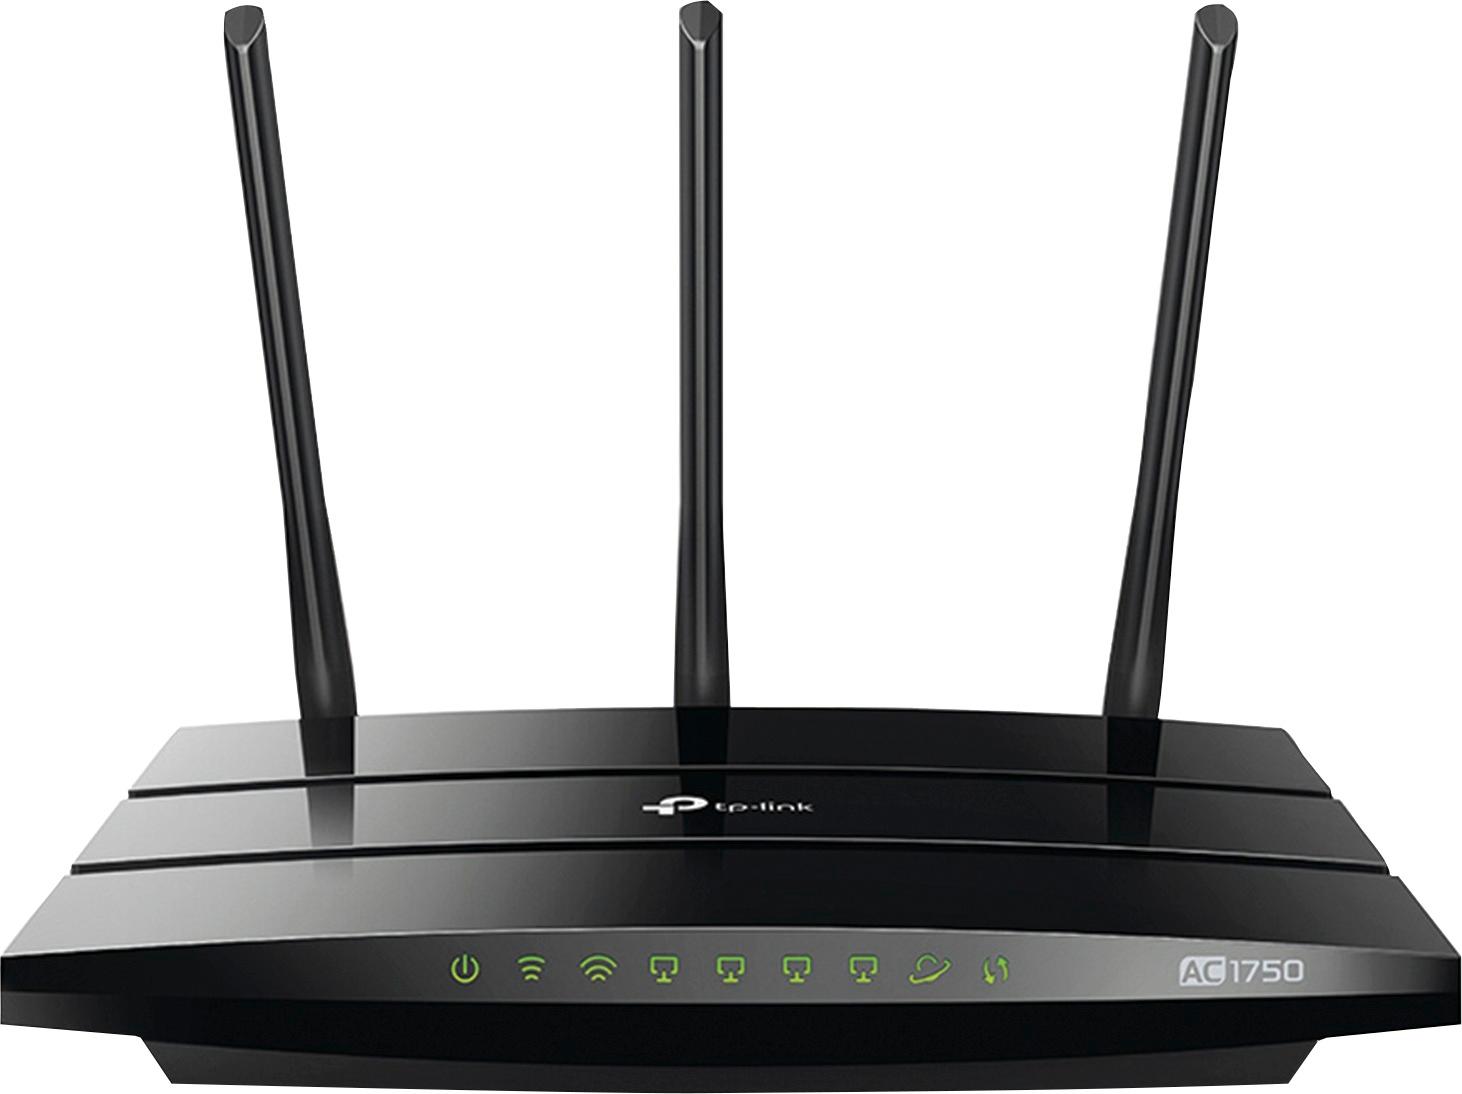 Alleged call out dam TP-Link Archer AC1750 Dual-Band Wi-Fi 5 Router Black ARCHER C7 - Best Buy